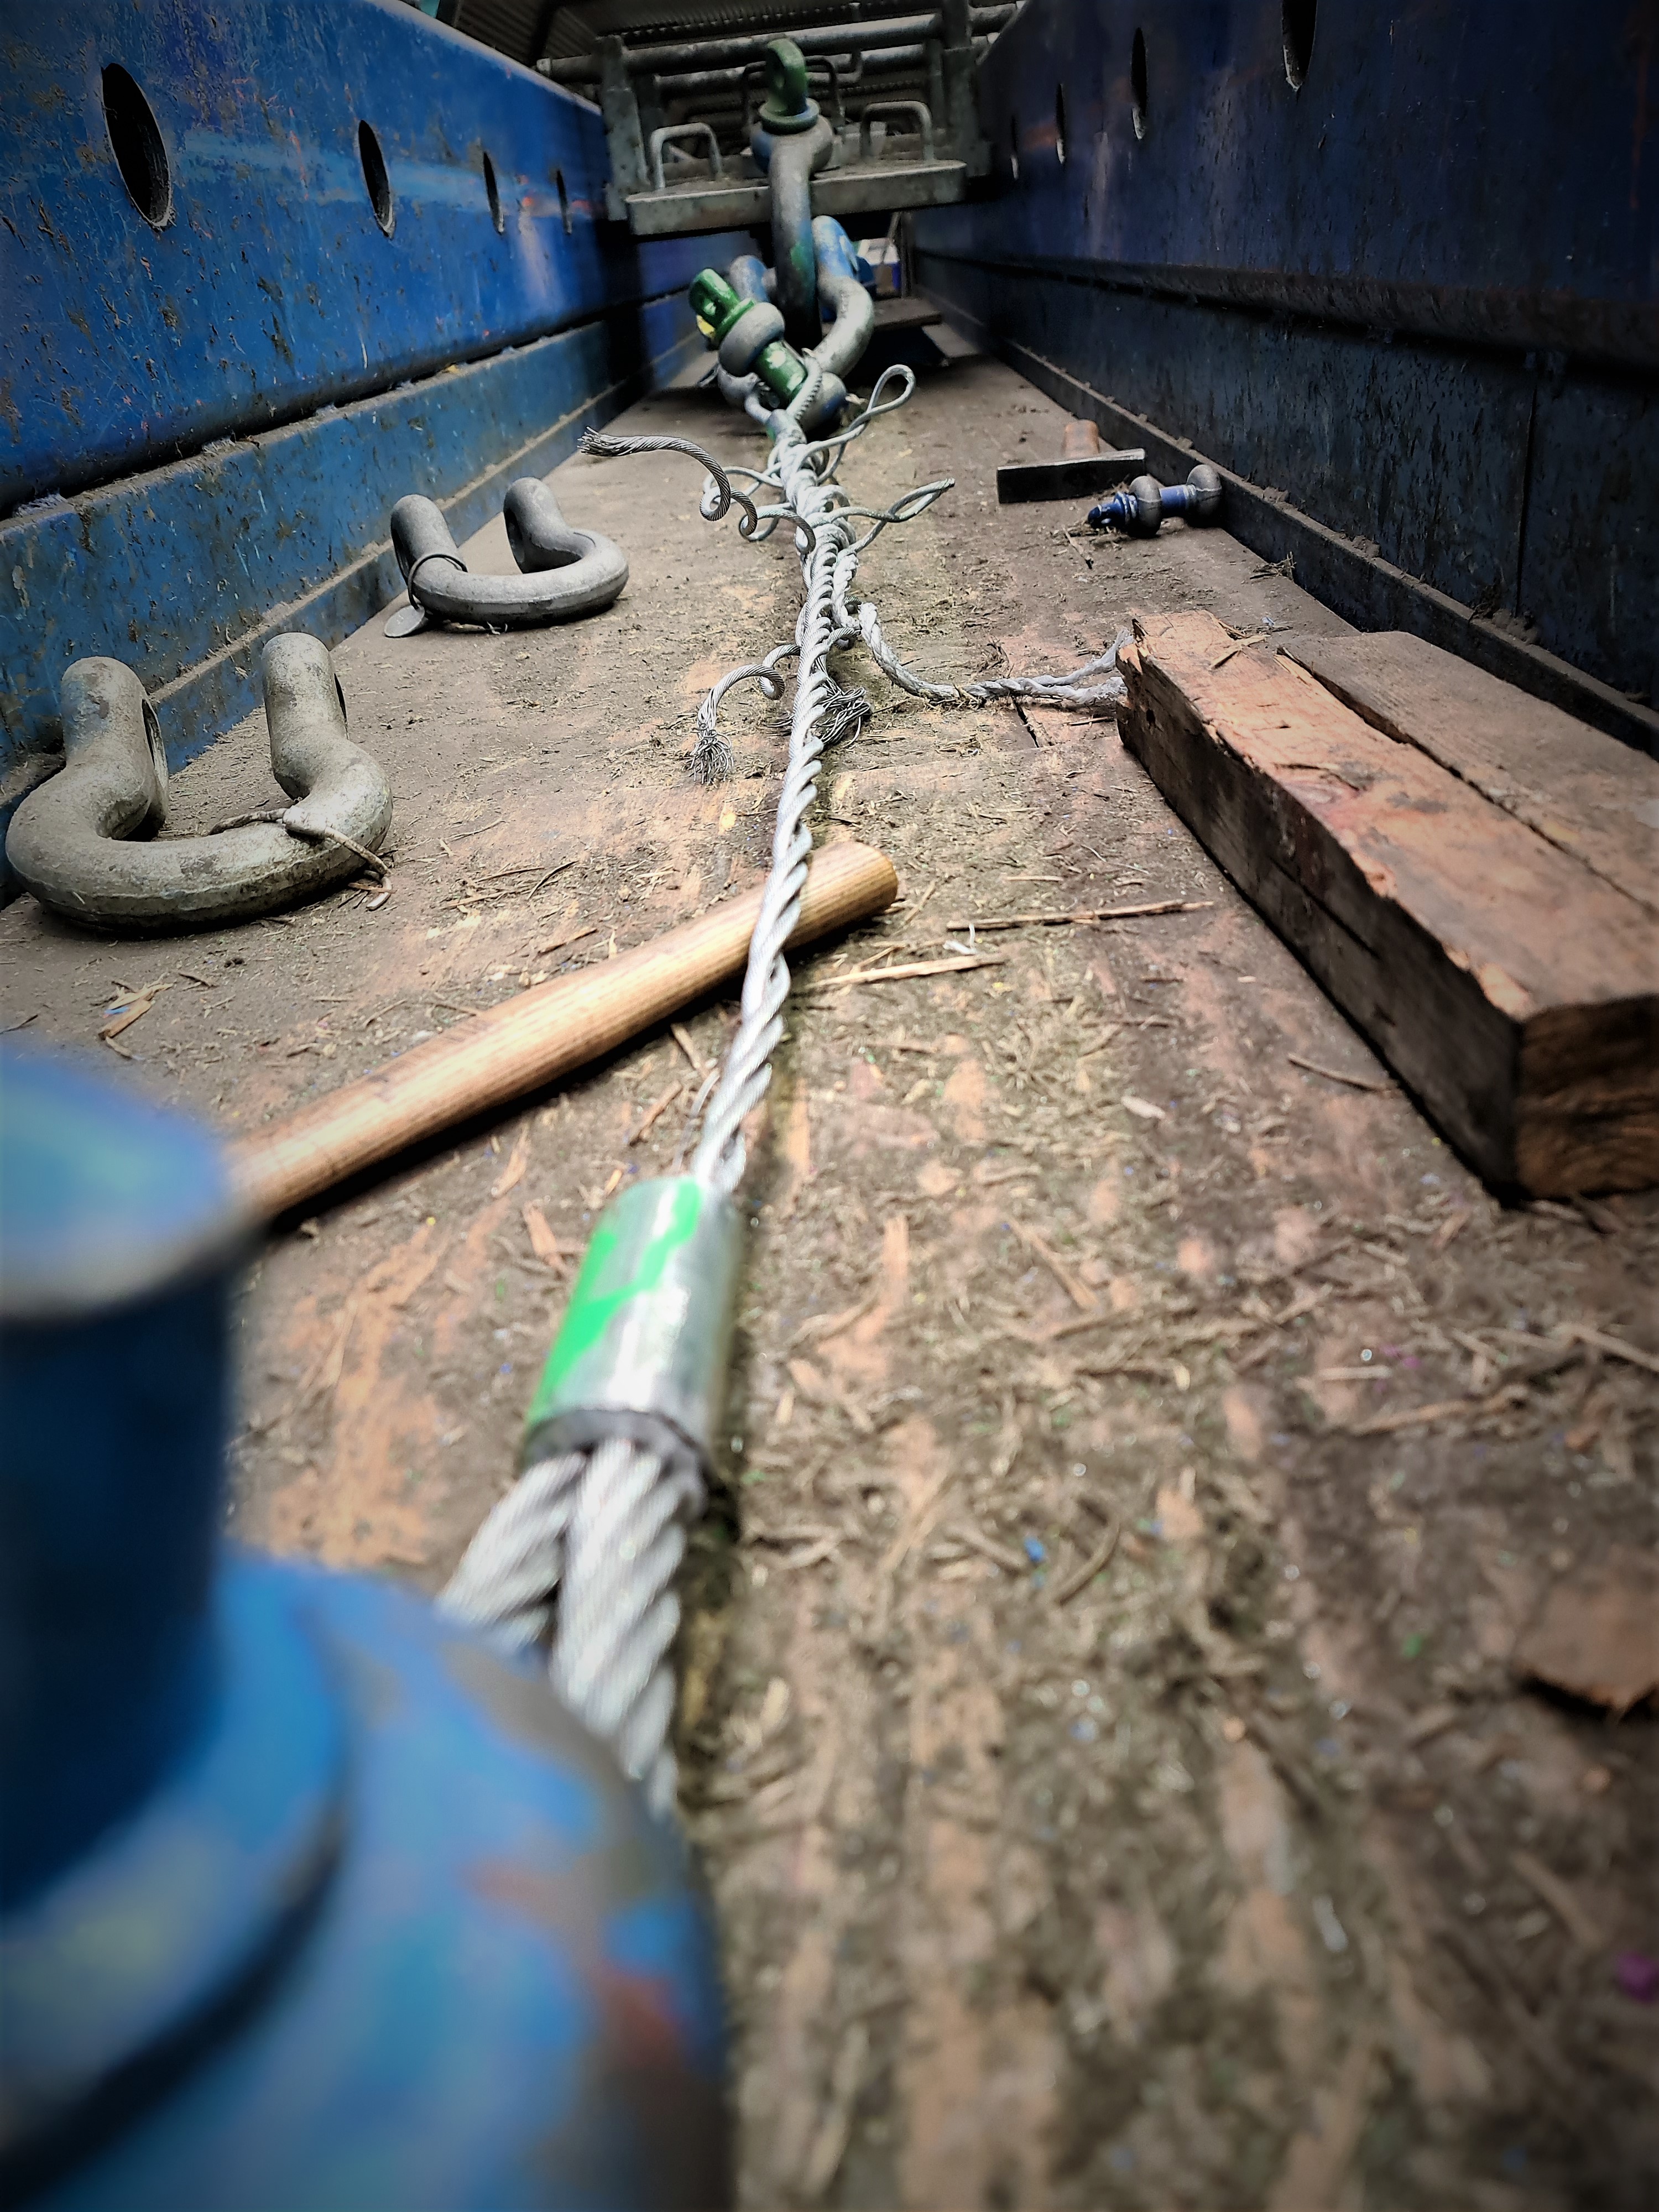 Load testing, spooling and splicing